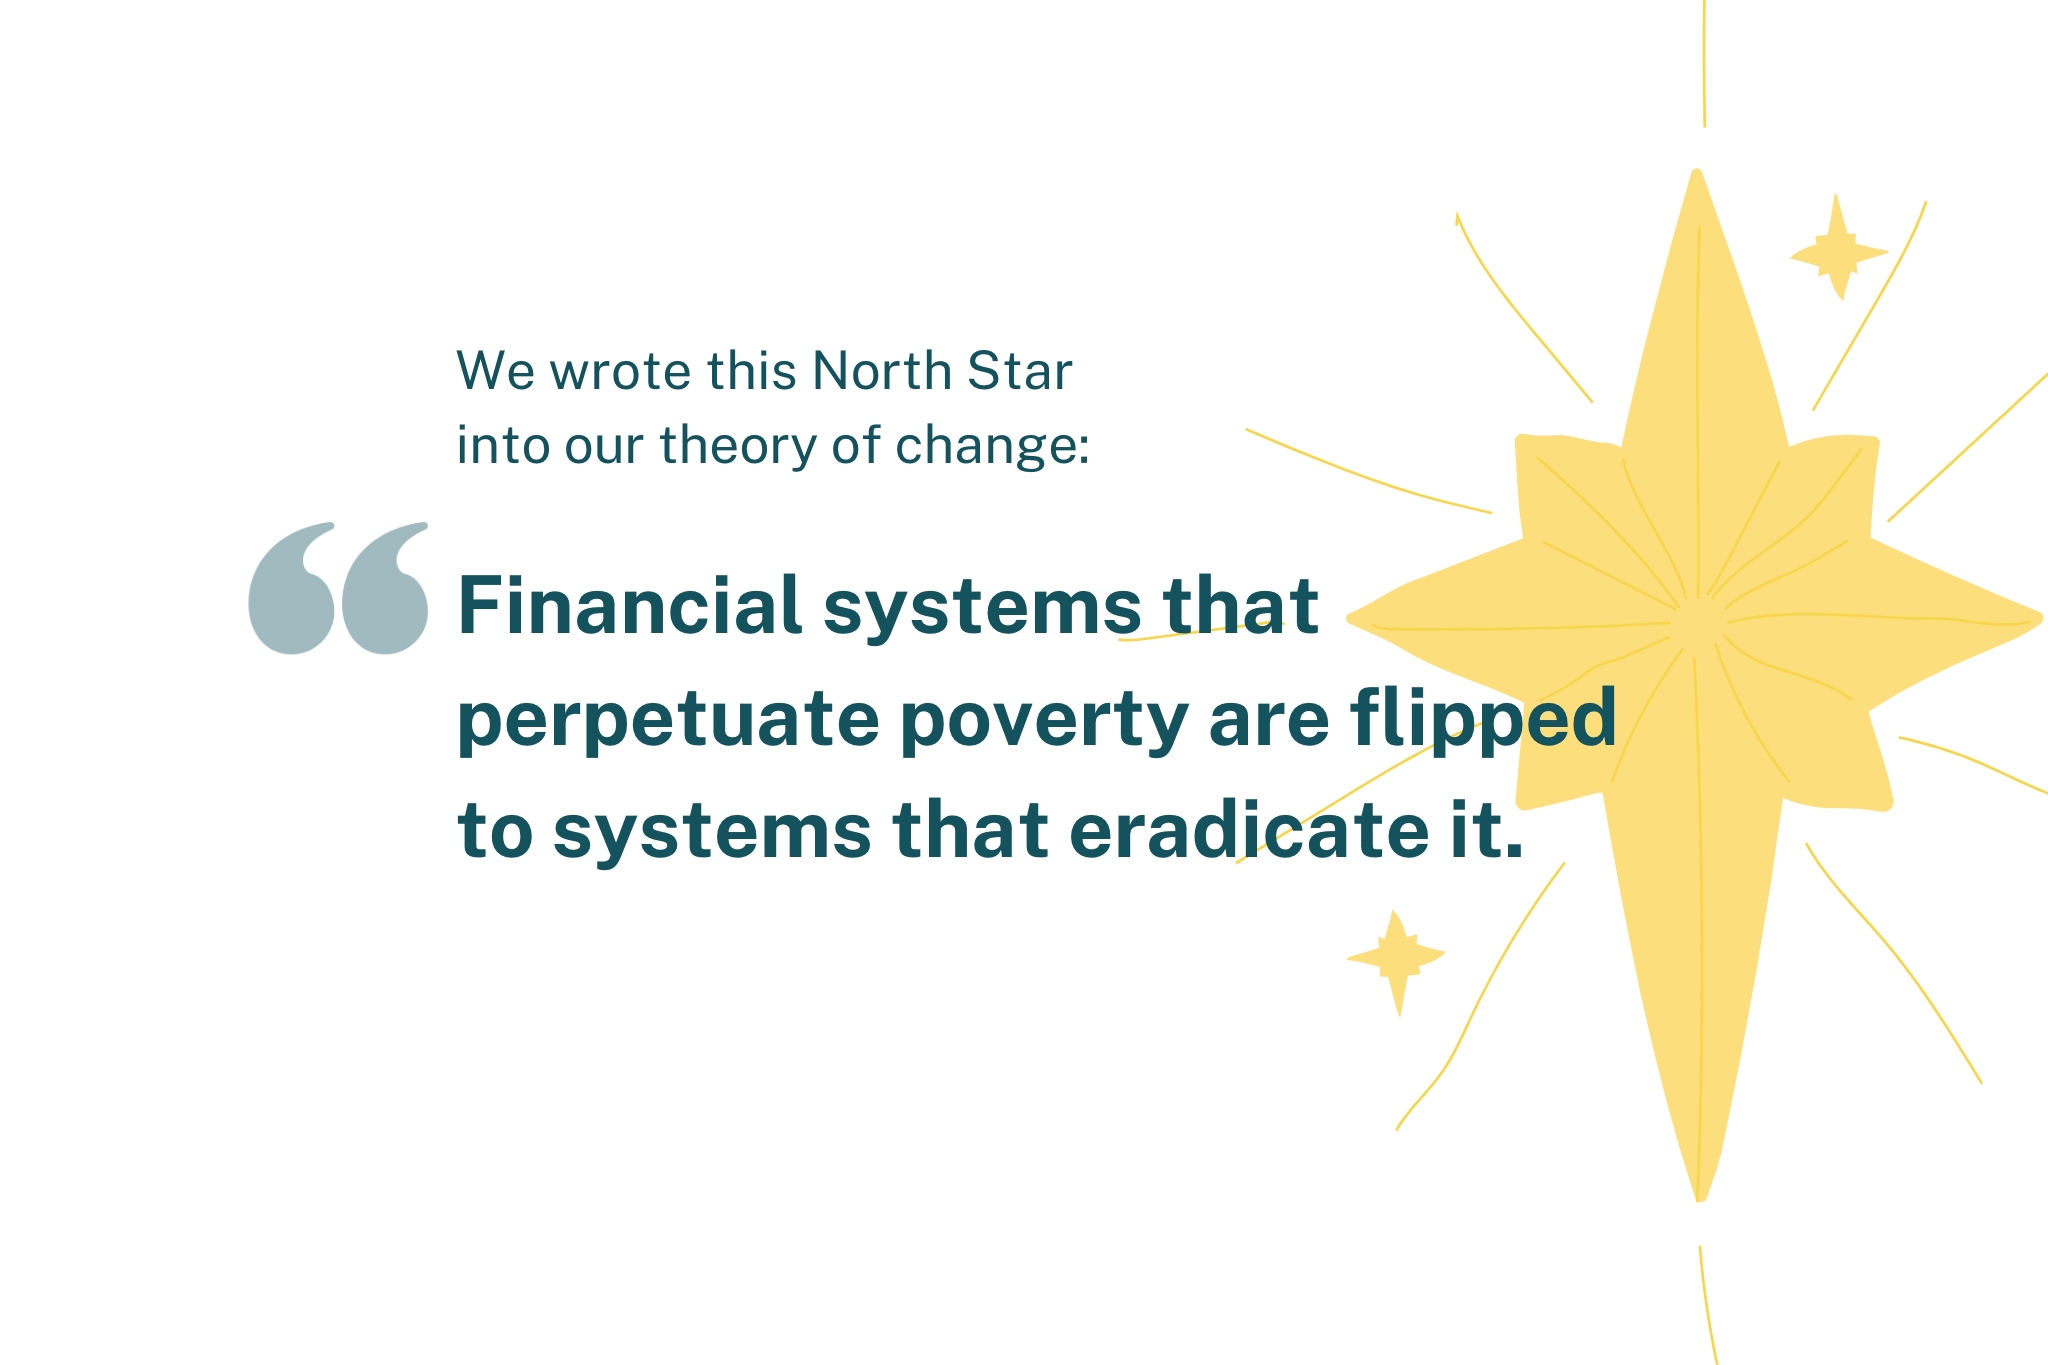 Financial systems that perpetuate poverty are flipped to systems that eradicate it.